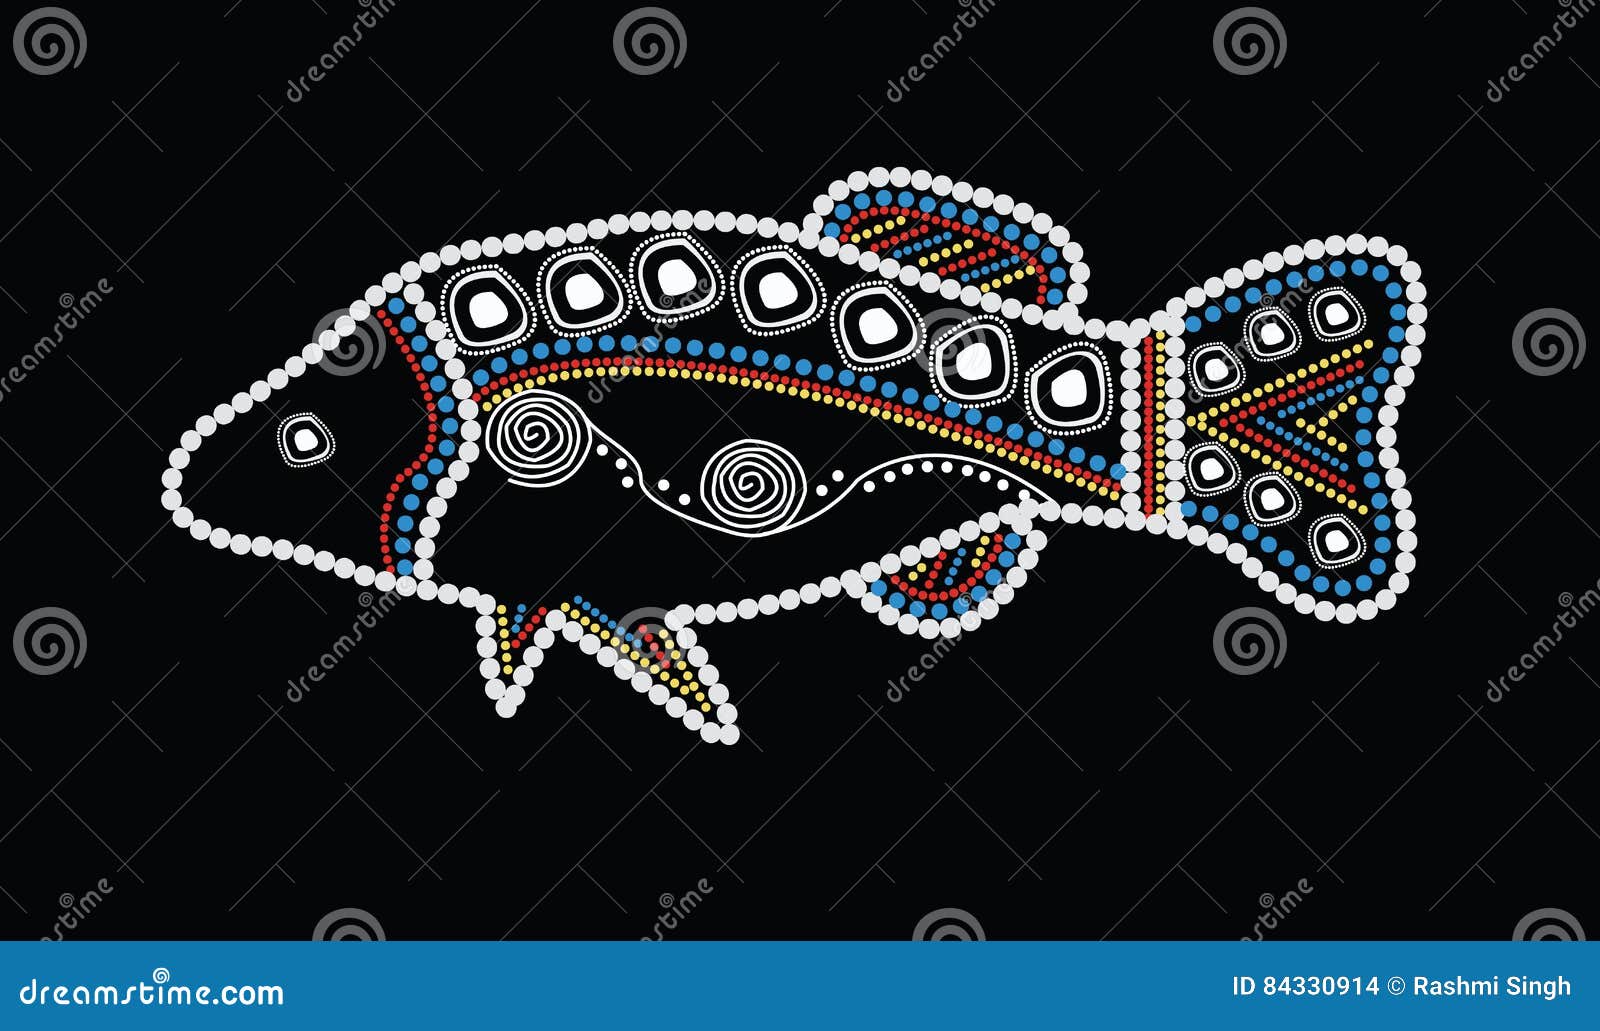 Sticker A illustration based on aboriginal style of dot painting